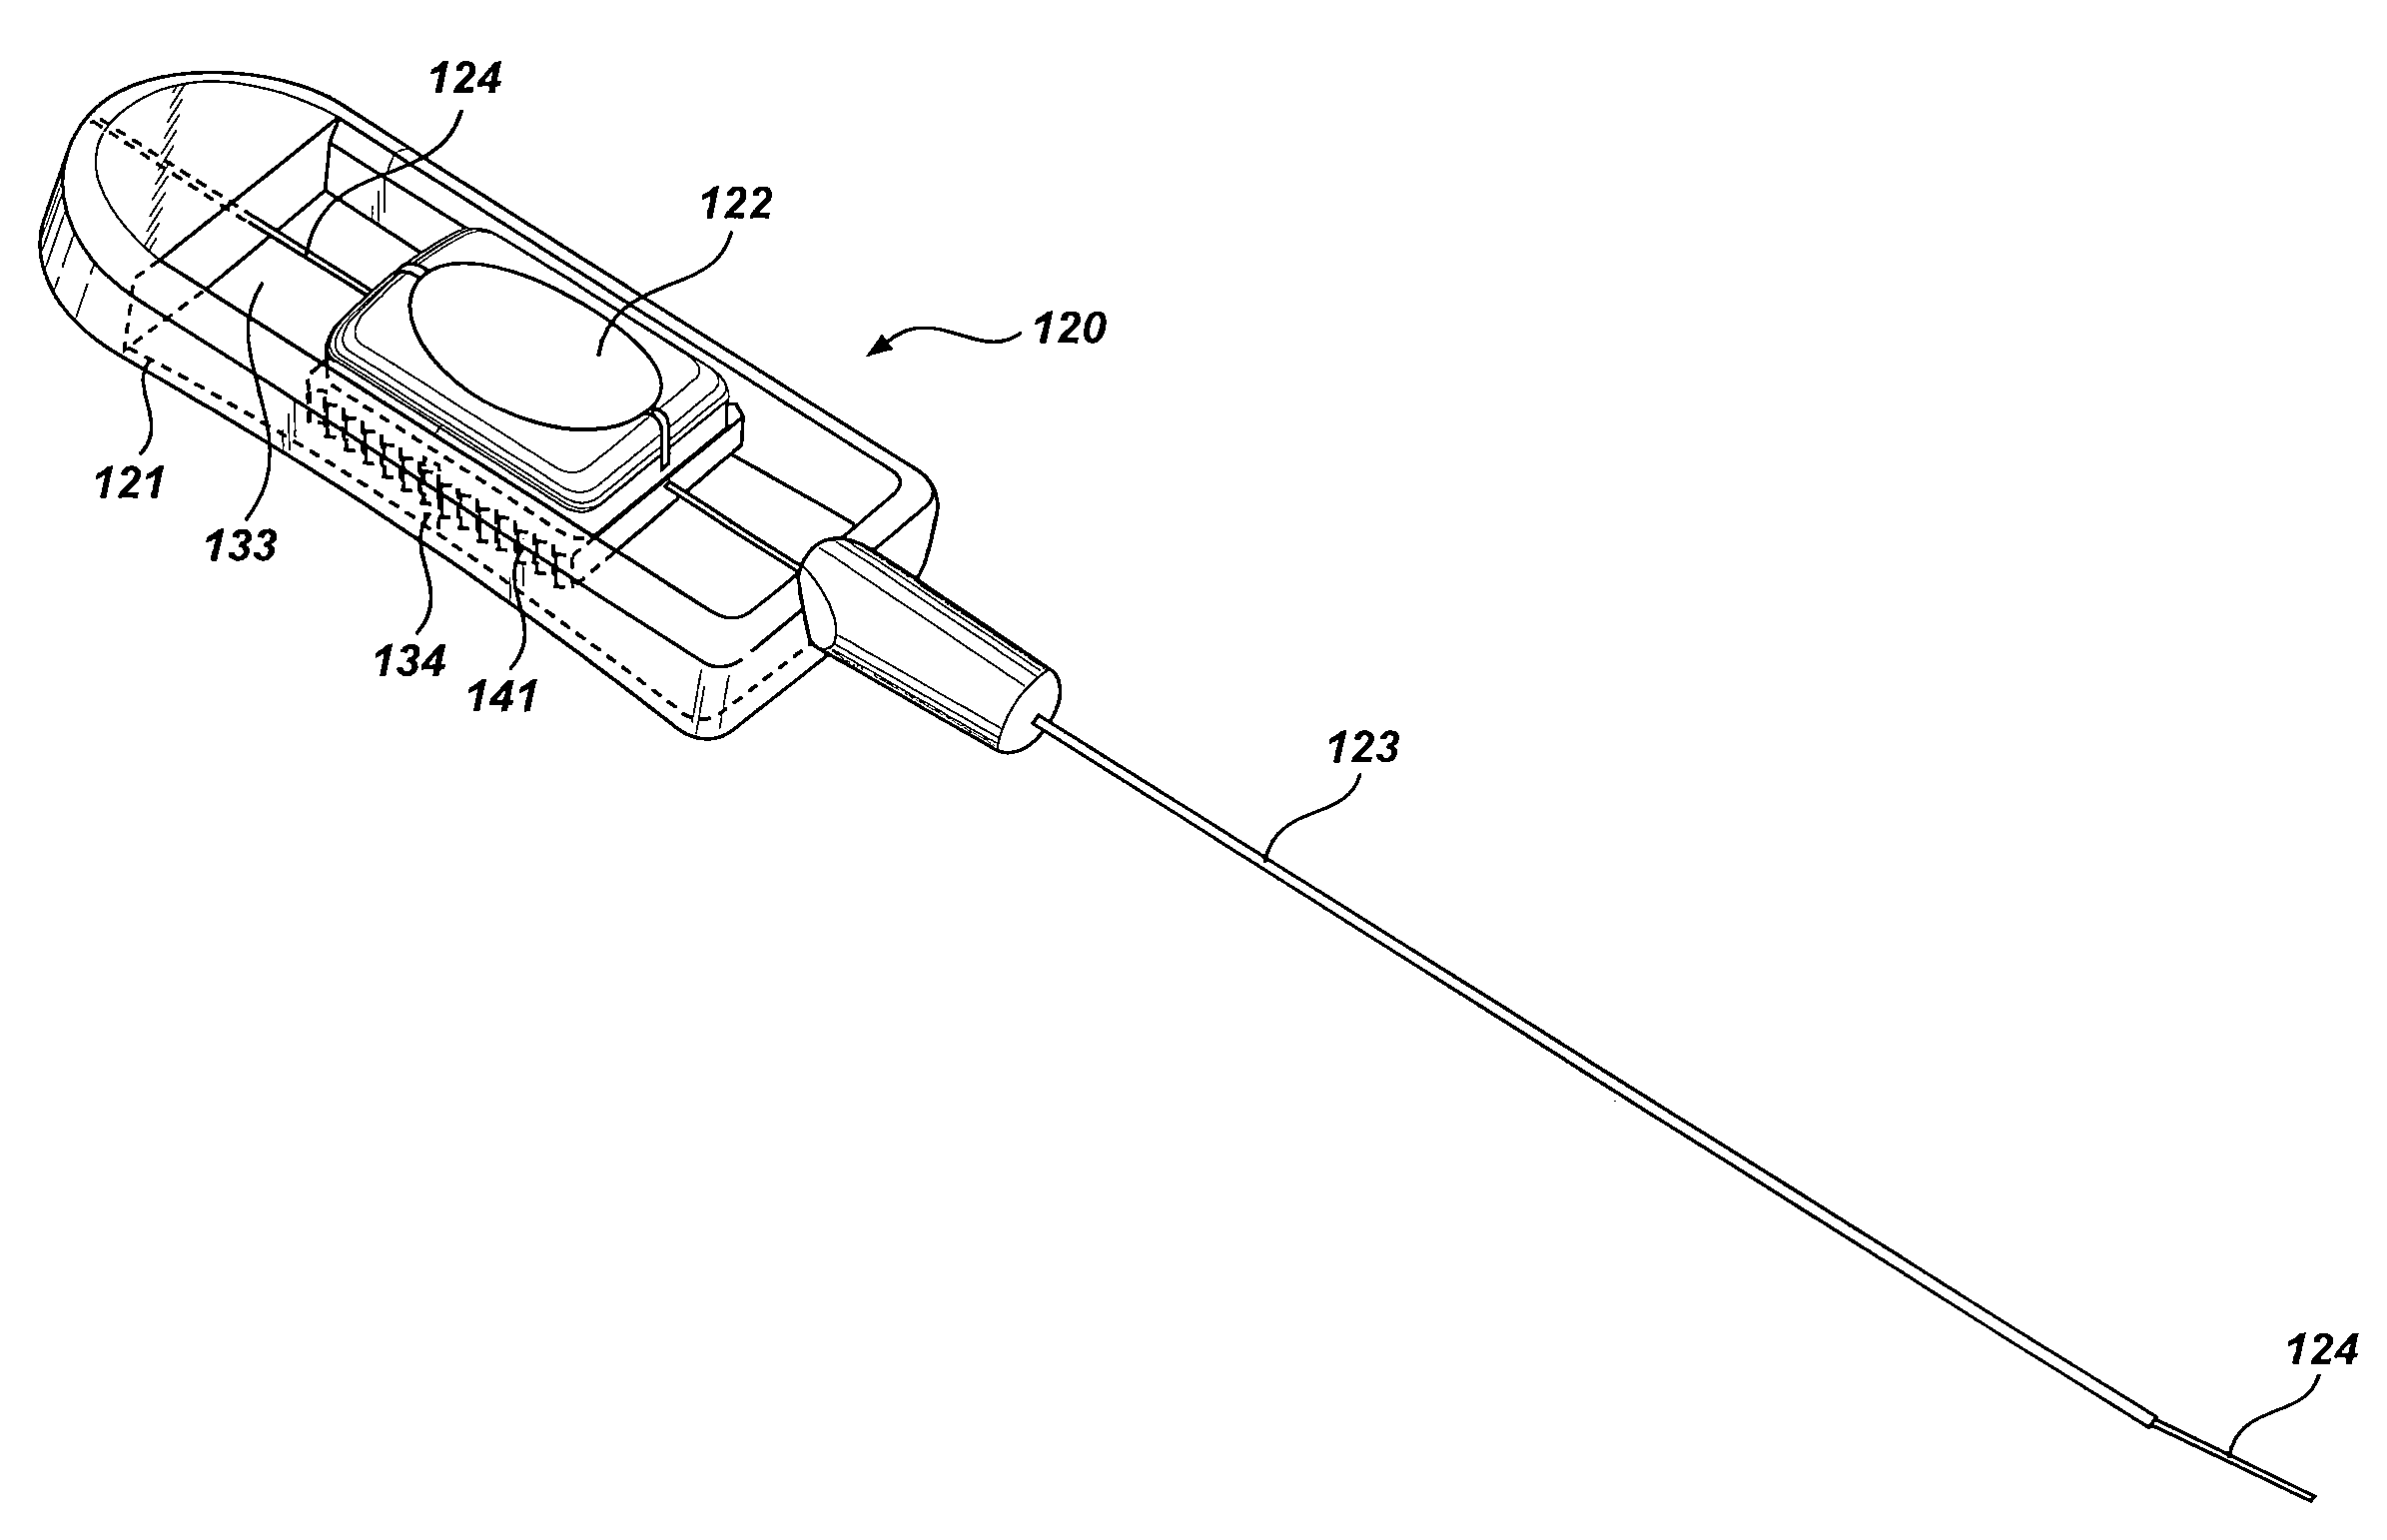 Steerable stylet handle assembly